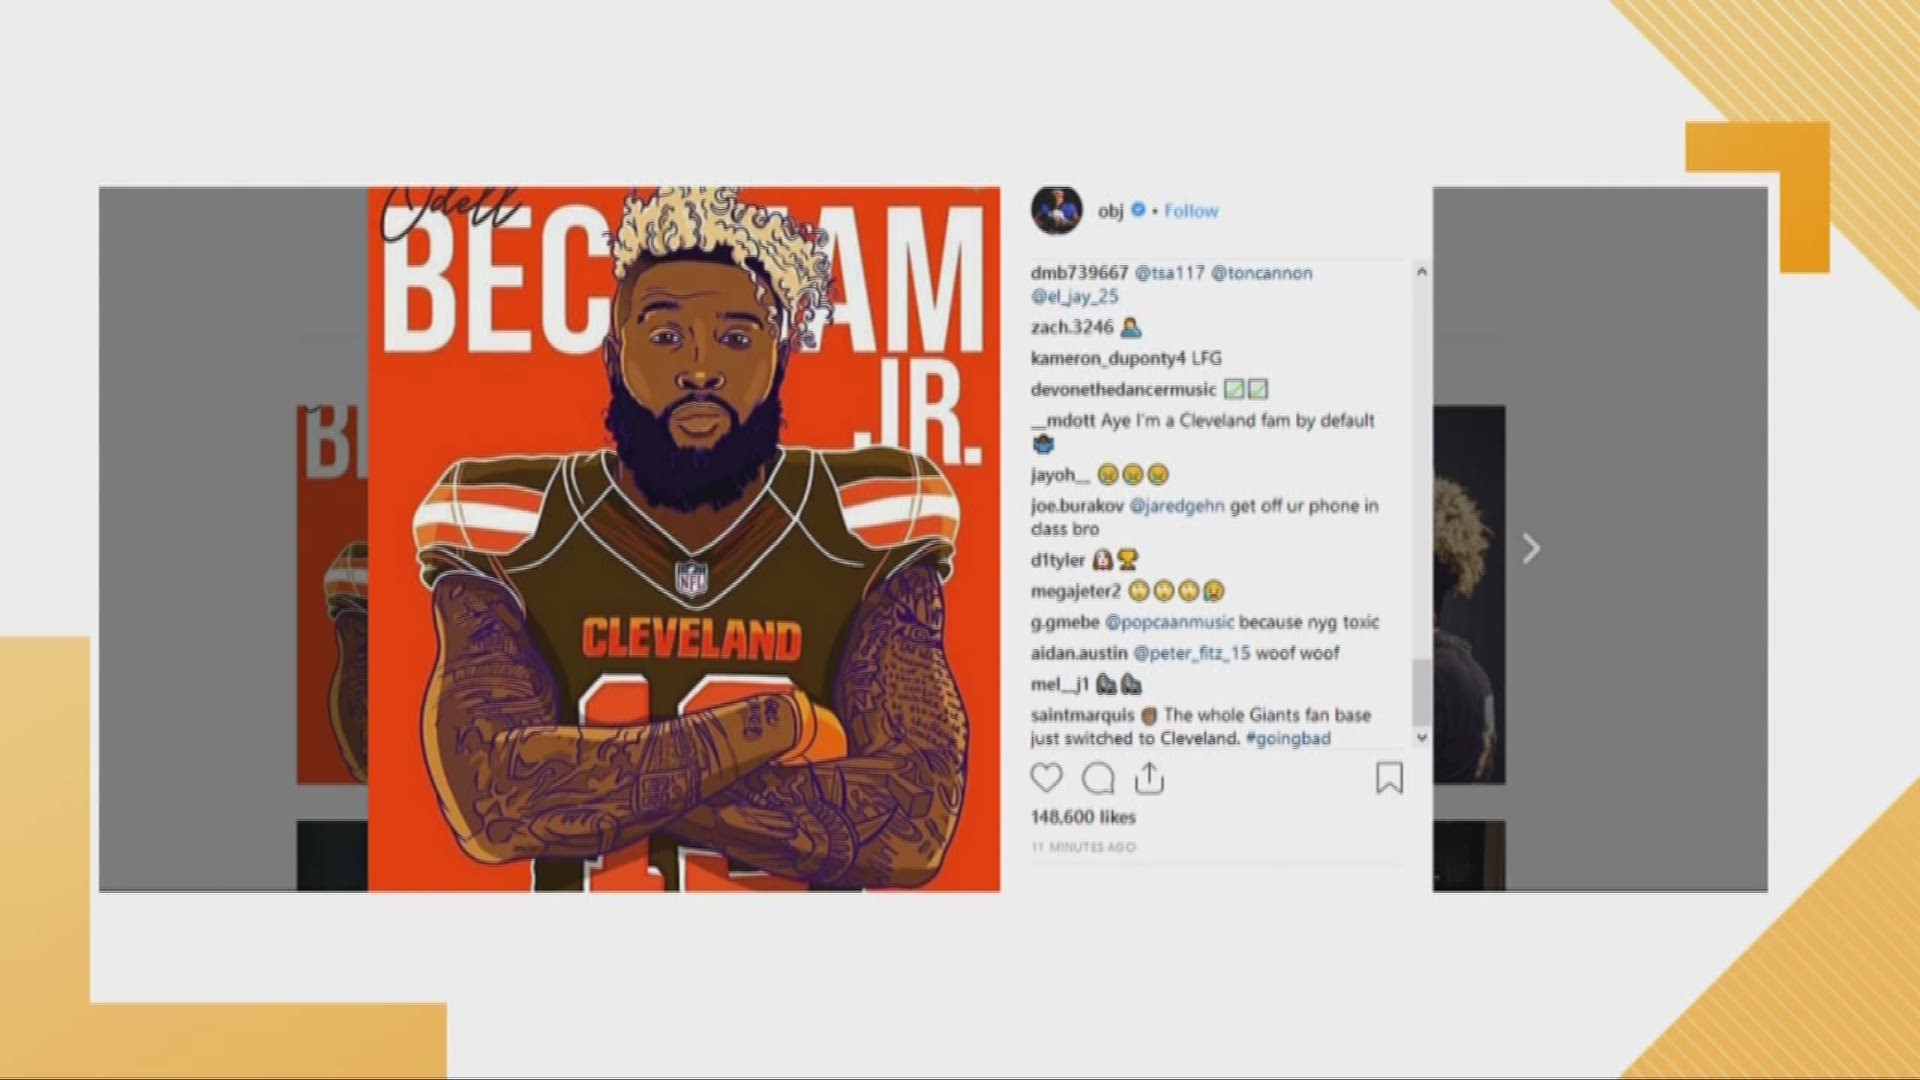 March 13, 2019: Hours after it was revealed he had been traded to the Cleveland Browns, Odell Beckham Jr. took to Instagram to celebrate the news.